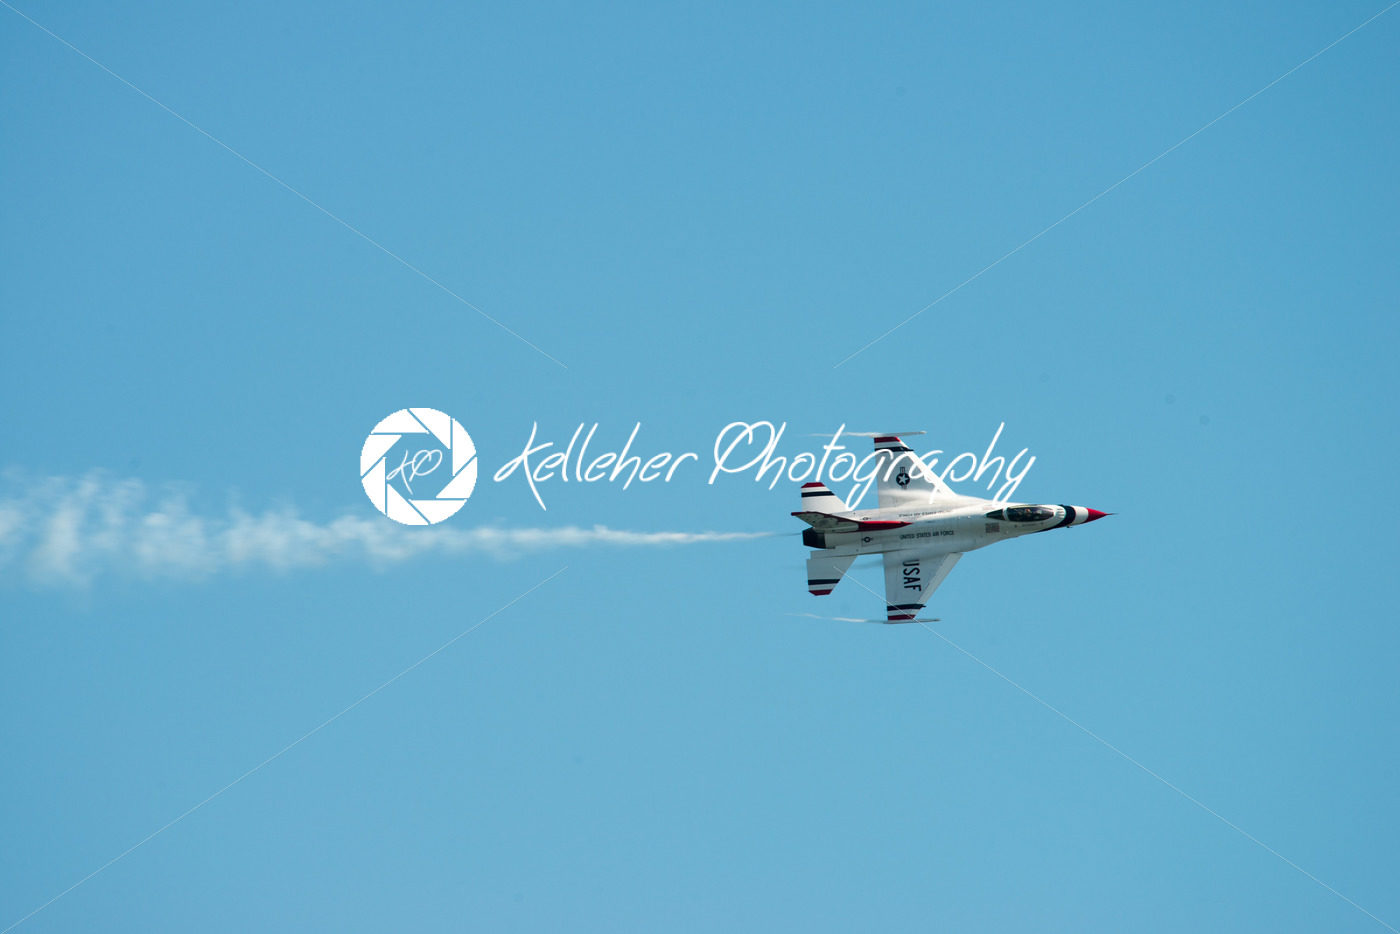 ATLANTIC CITY, NJ – AUGUST 17: U.S. Air Force Thunderbirds at the Annual Atlantic City Air Show on August 17, 2016 - Kelleher Photography Store